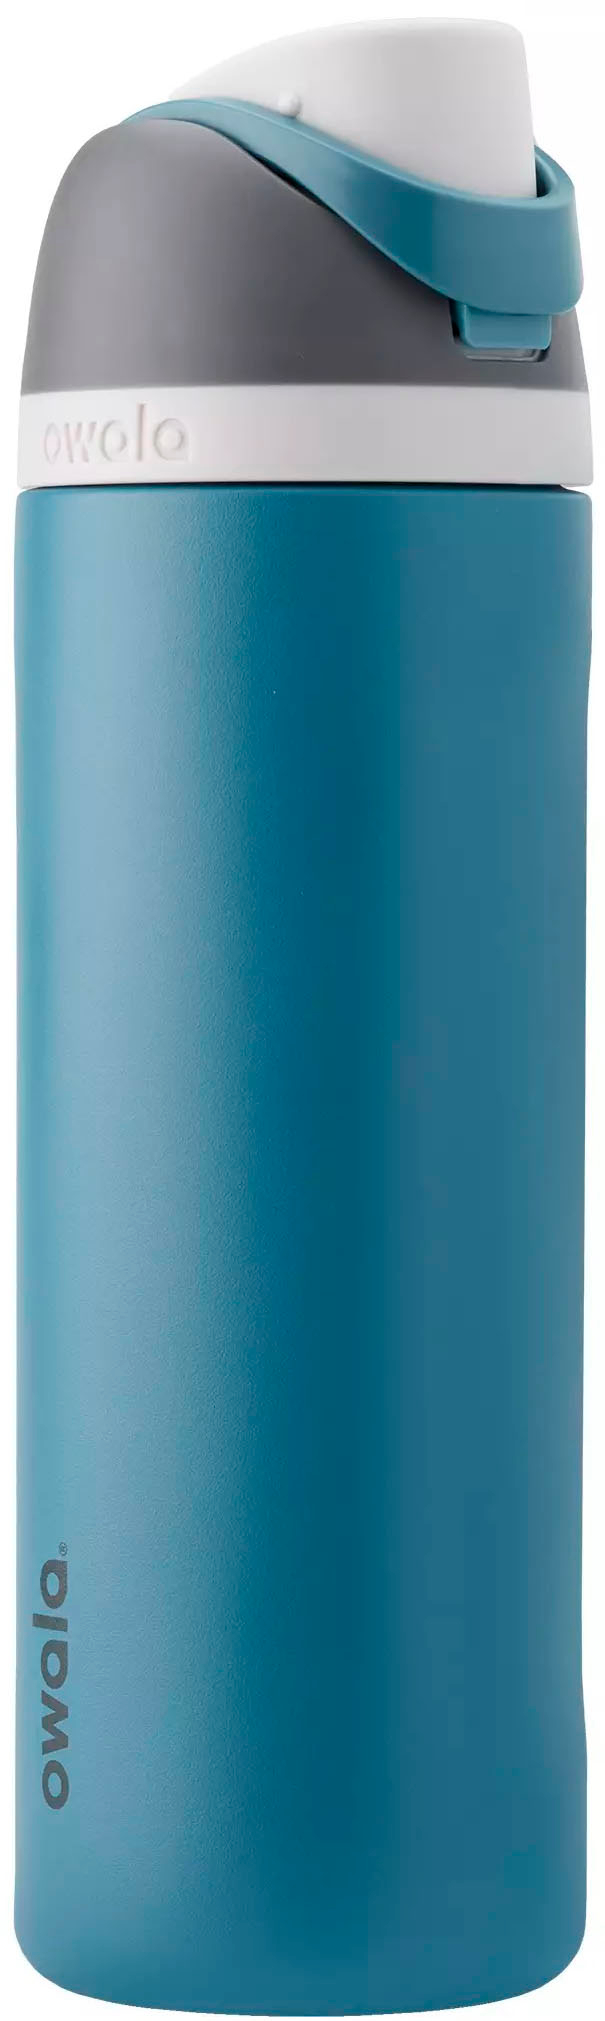 Owala FreeSip Insulated Stainless Steel 24 oz. Water Bottle Blue